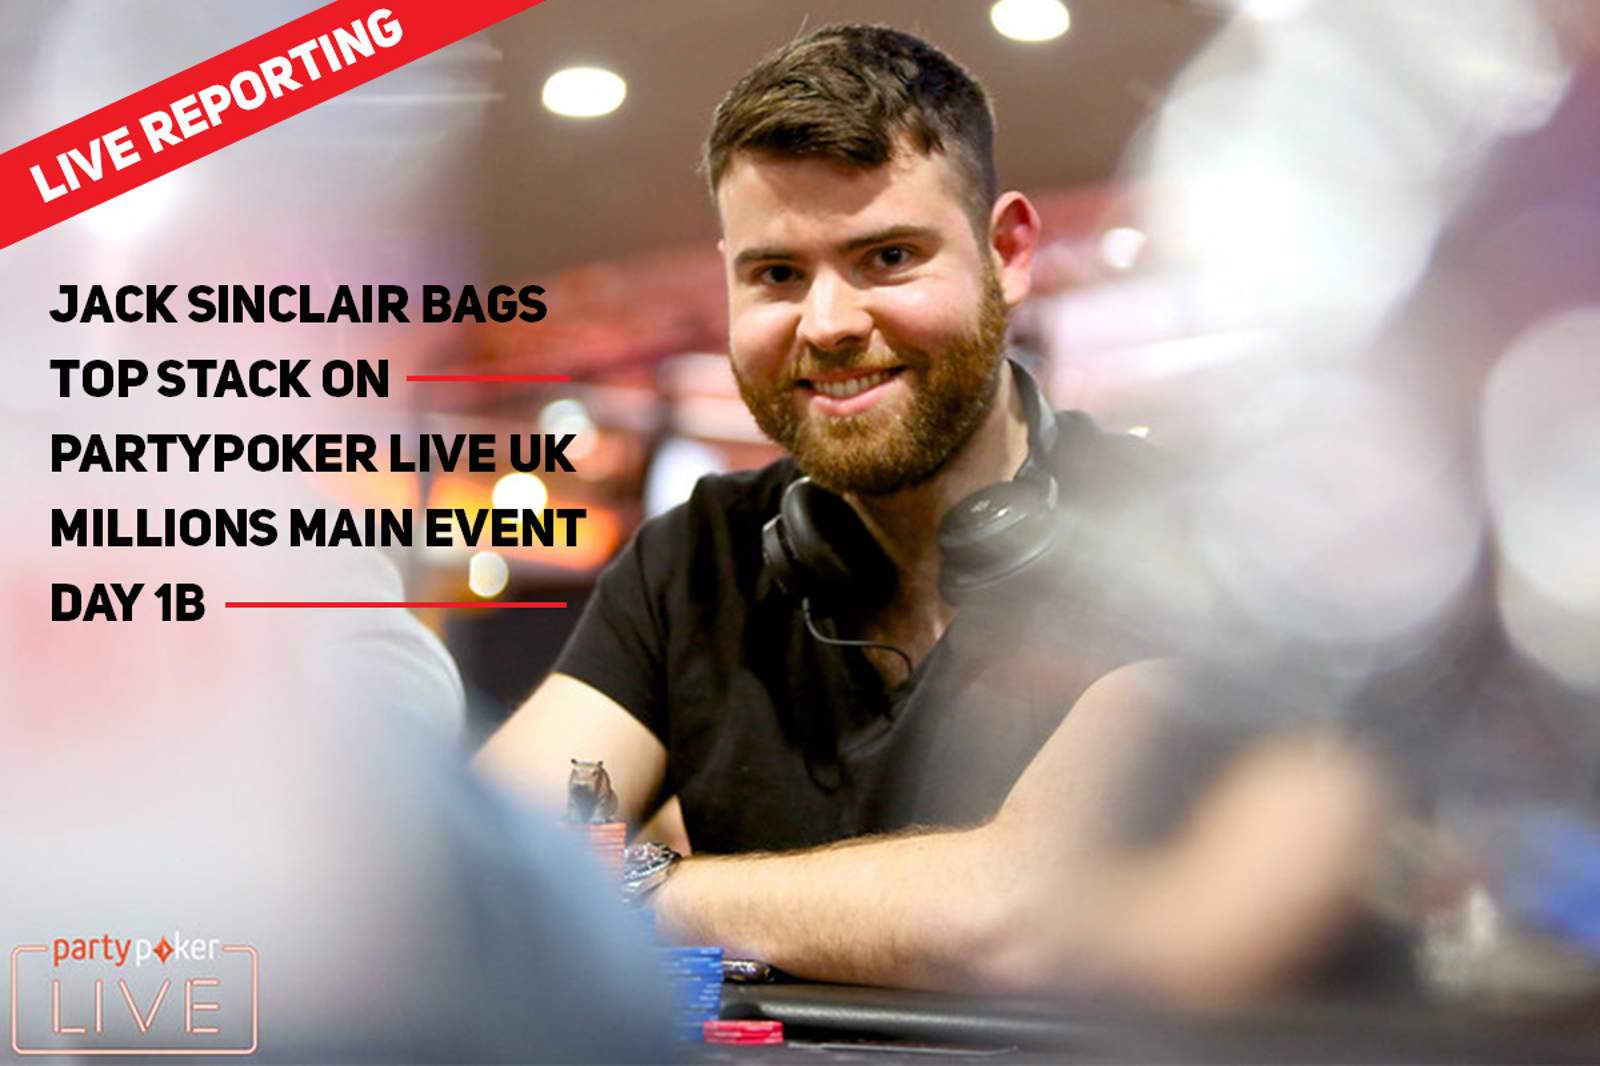 Jack Sinclair Bags Top Stack on partypoker LIVE UK Millions Main Event Day 1b